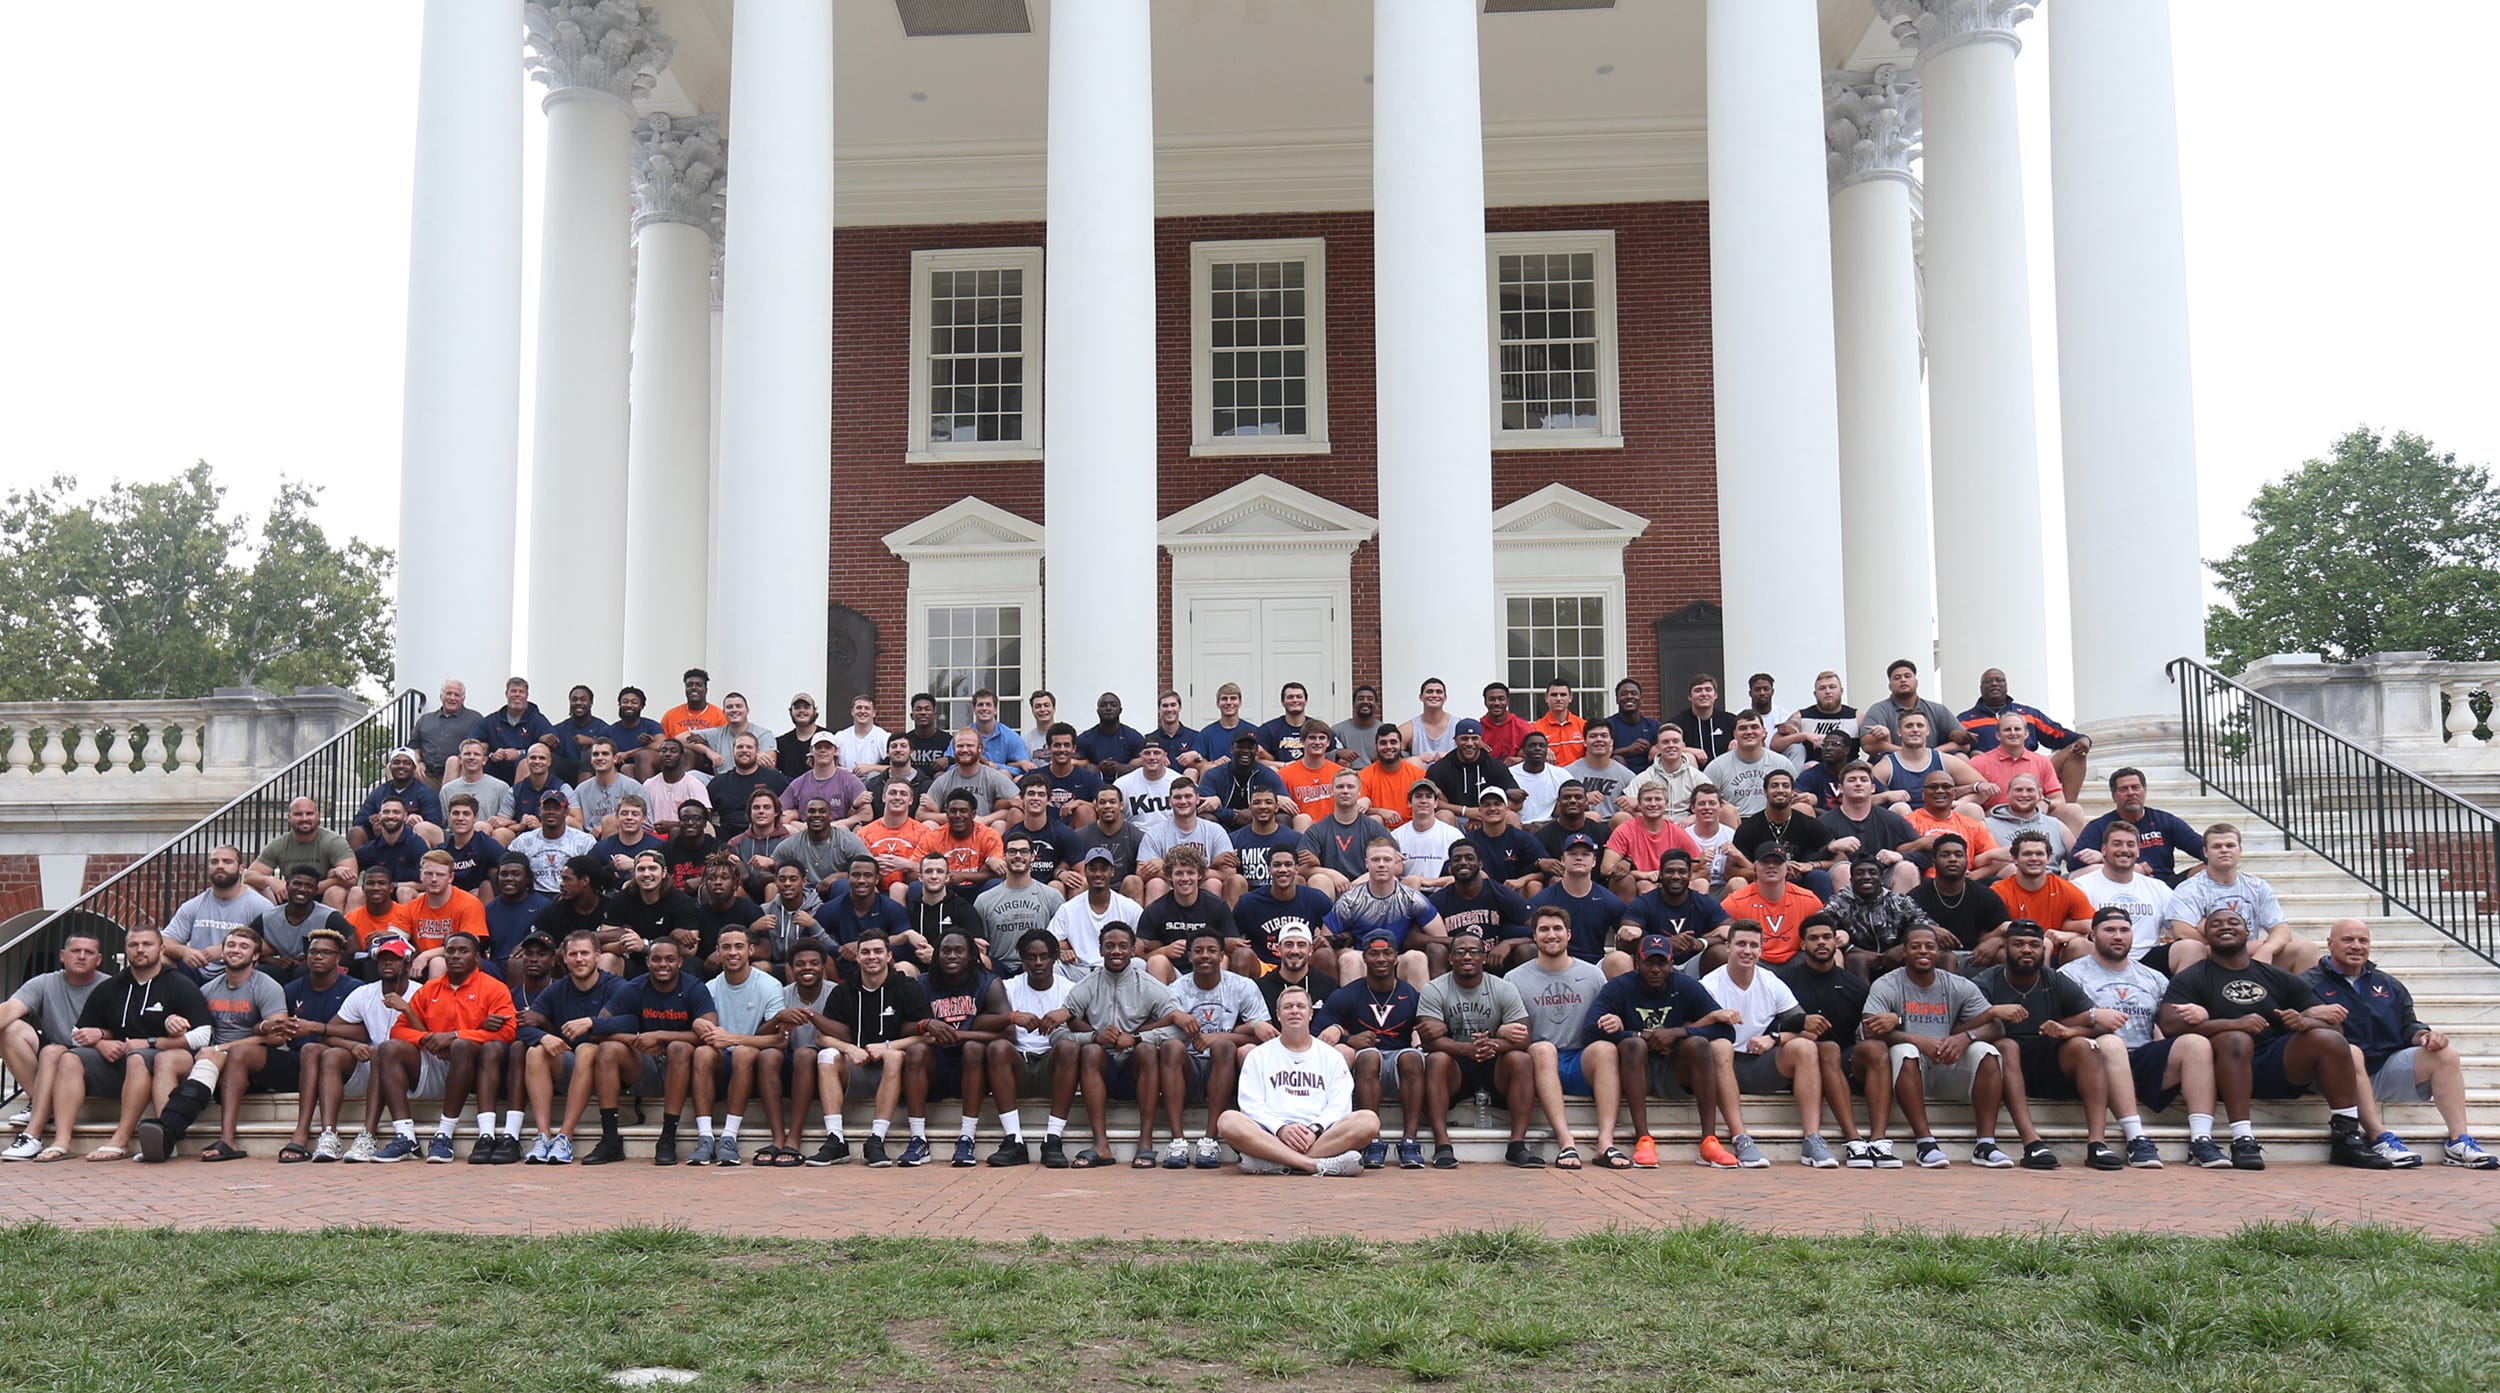 Virginia football team responds to Charlottesville violence with  resolve to inspire unity